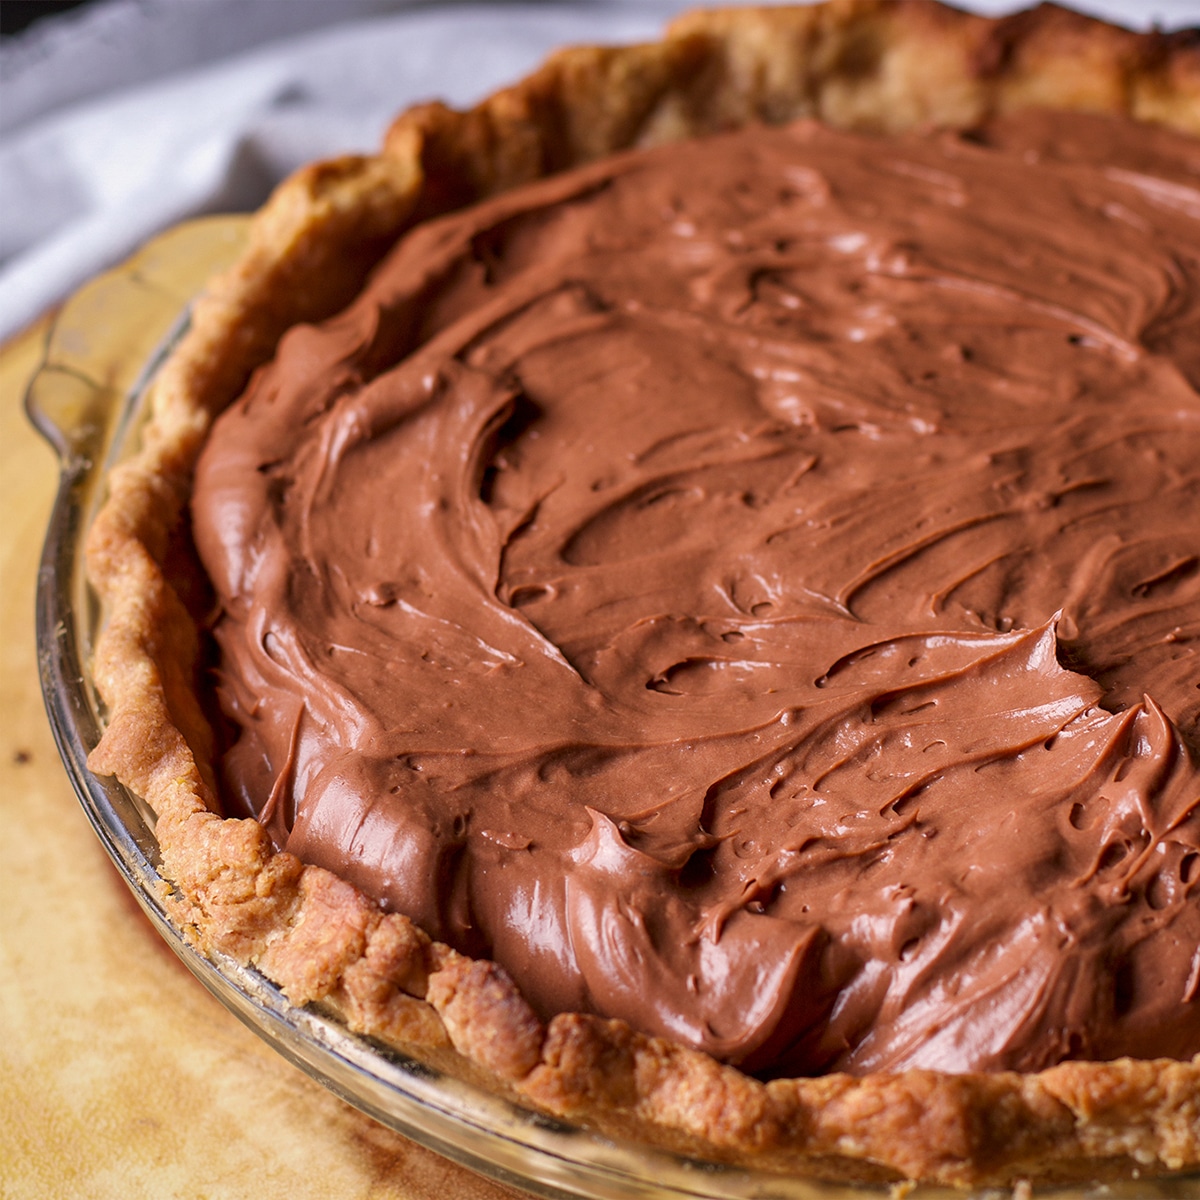 A baked toasted almond pie crust filled with chocolate pastry cream.